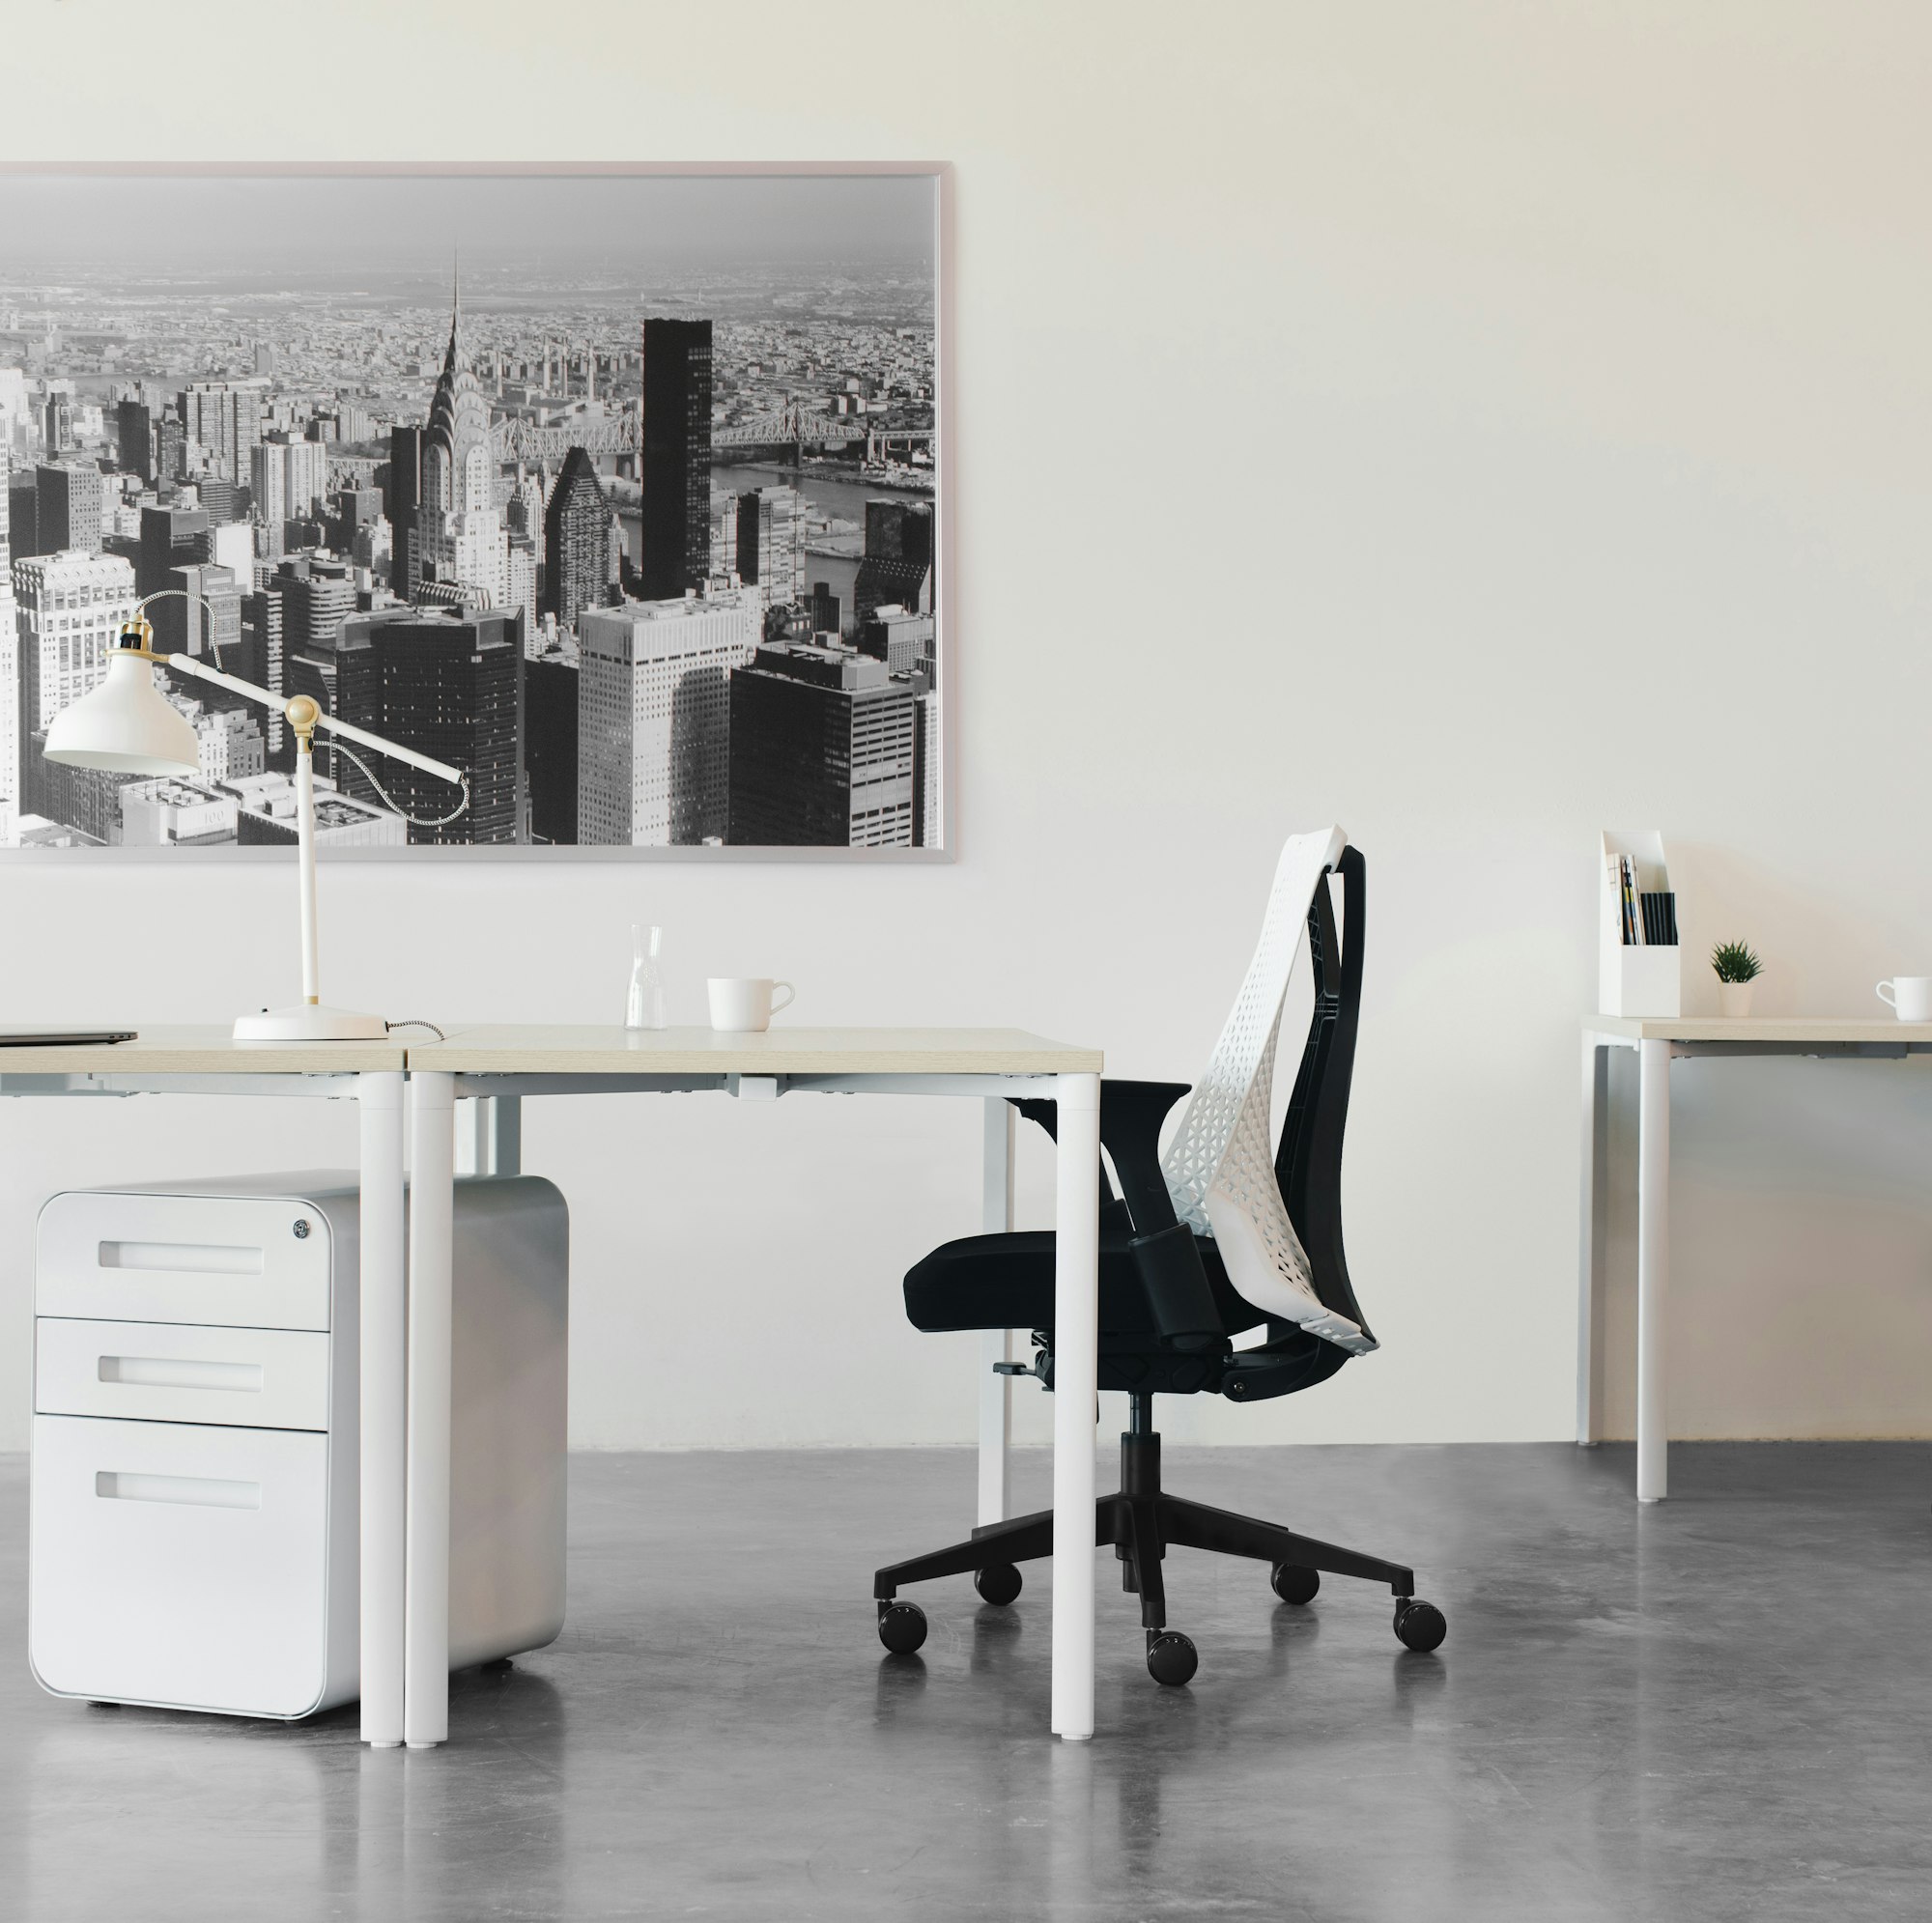 An open work space with a minimalist setup of chairs, tables, desks, and art.